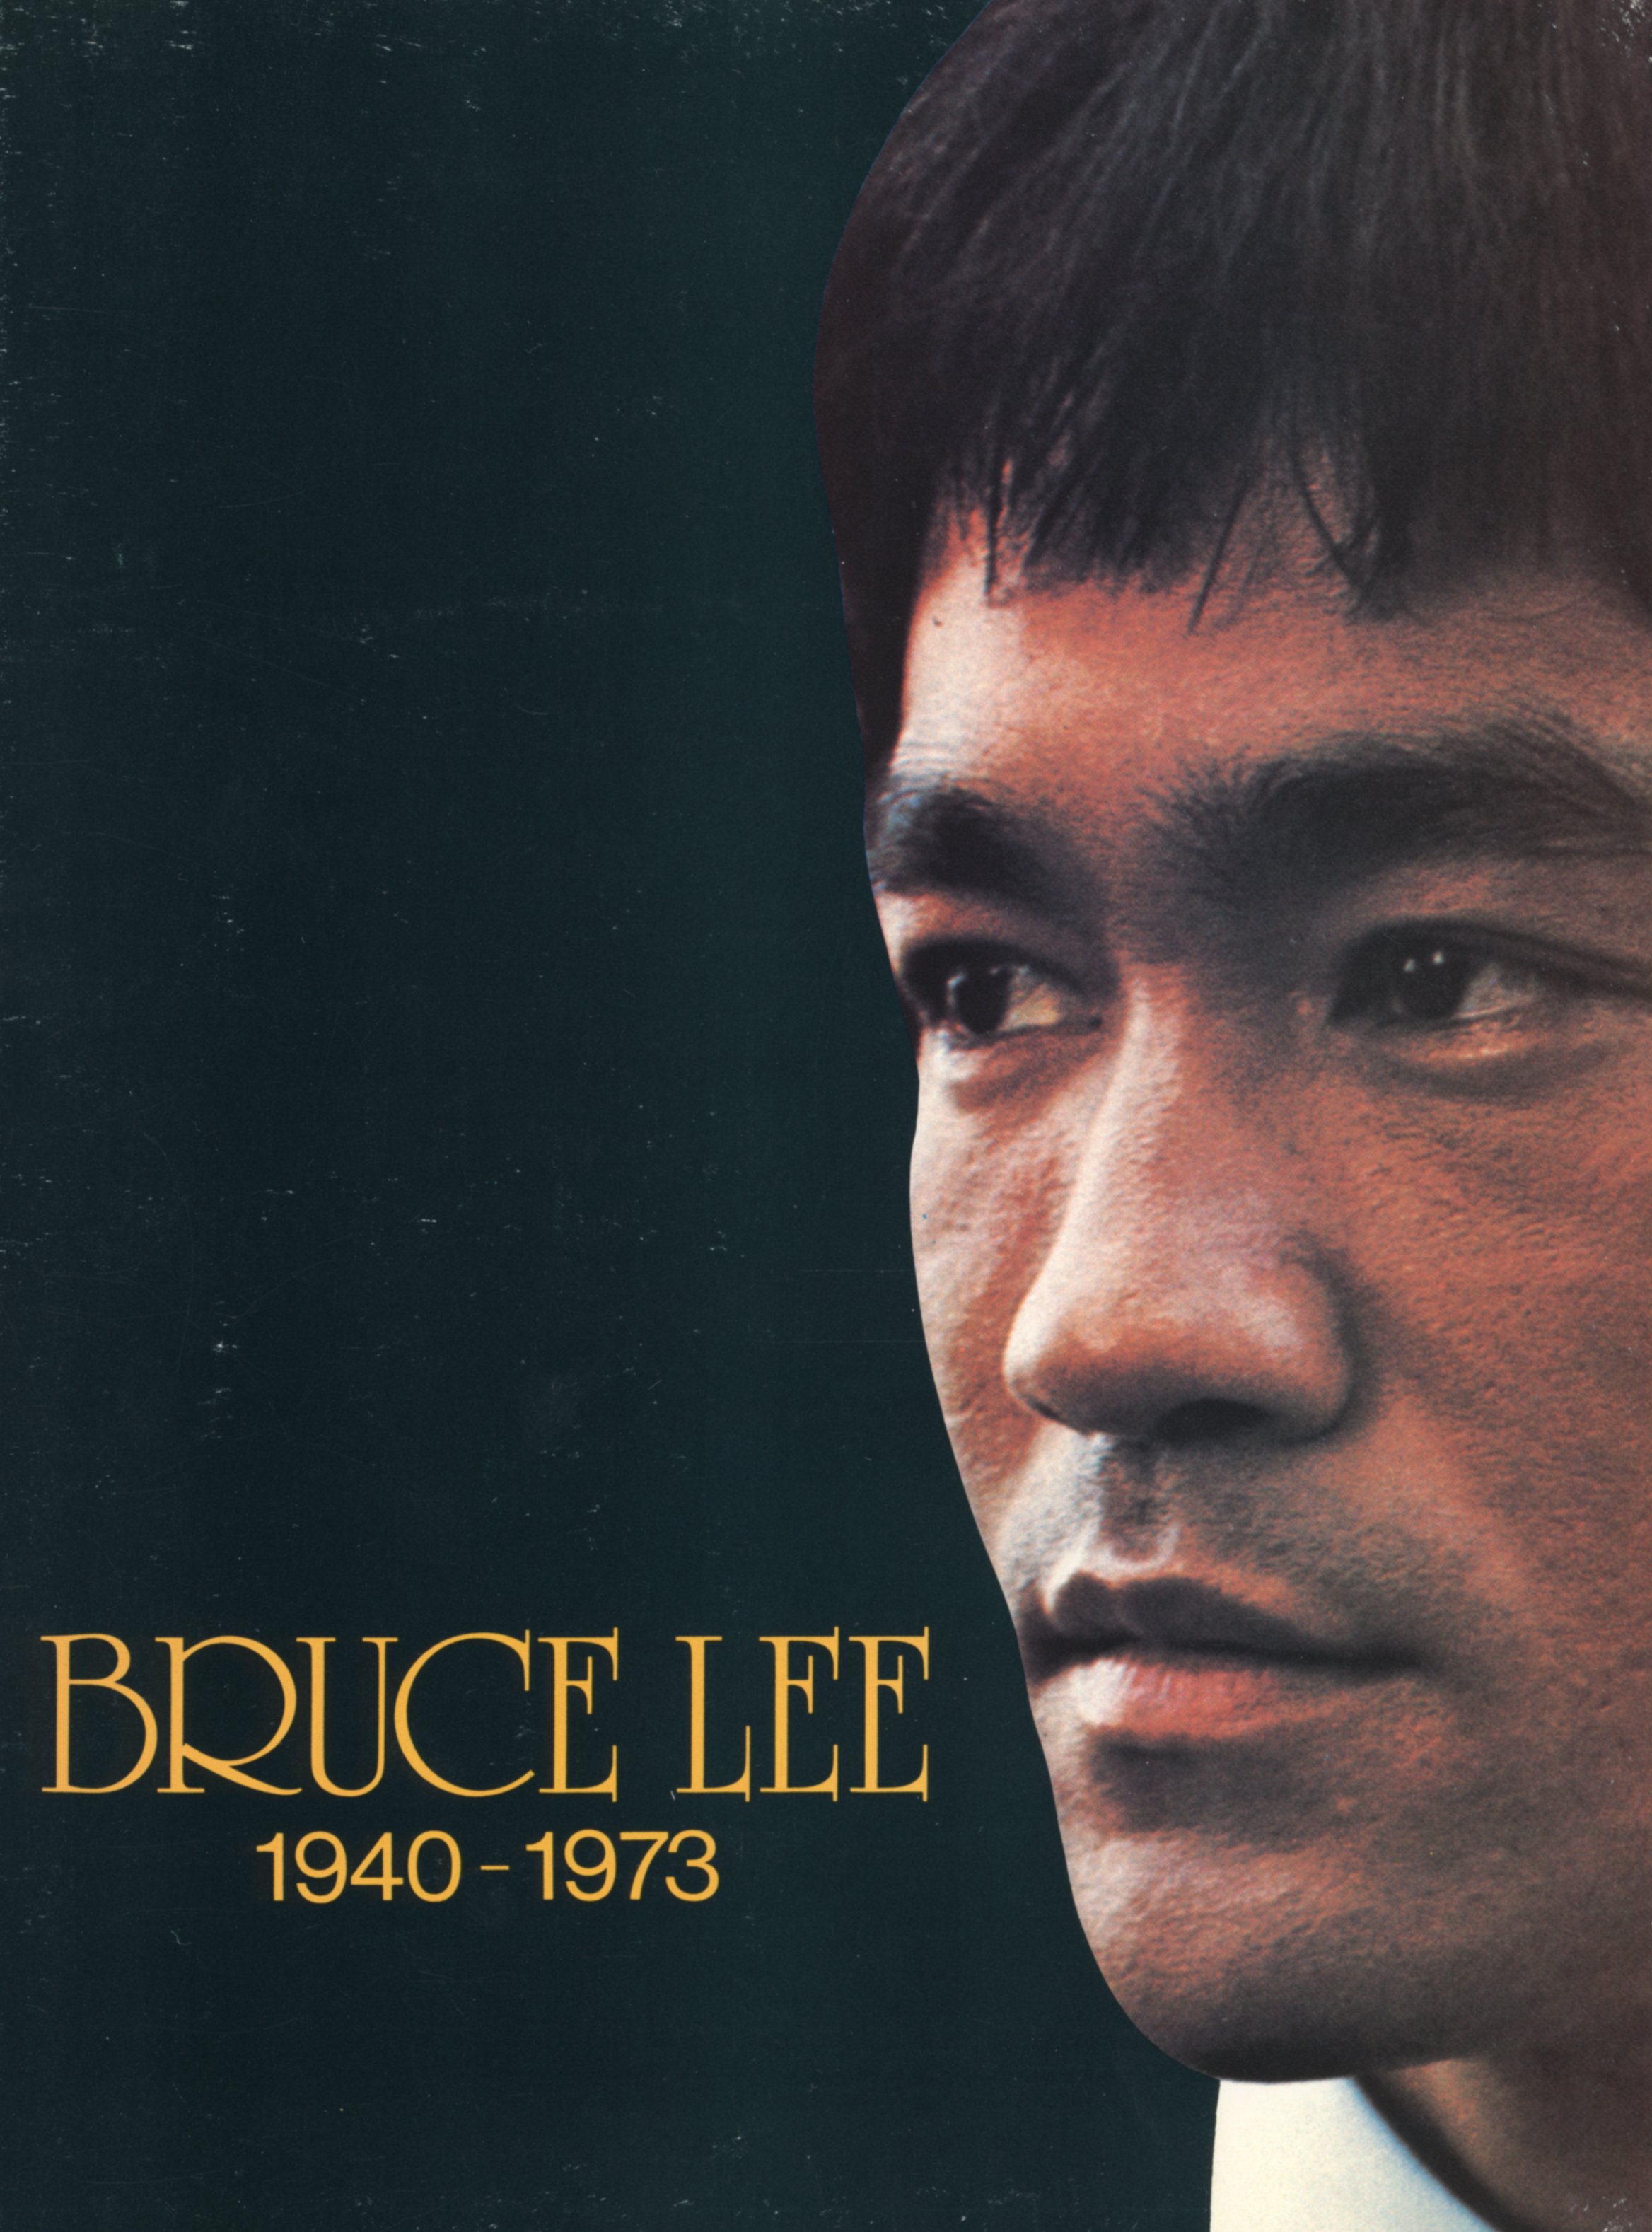 Bruce Lee Personal Memorabilia to Be Auctioned in Hong Kong May 26